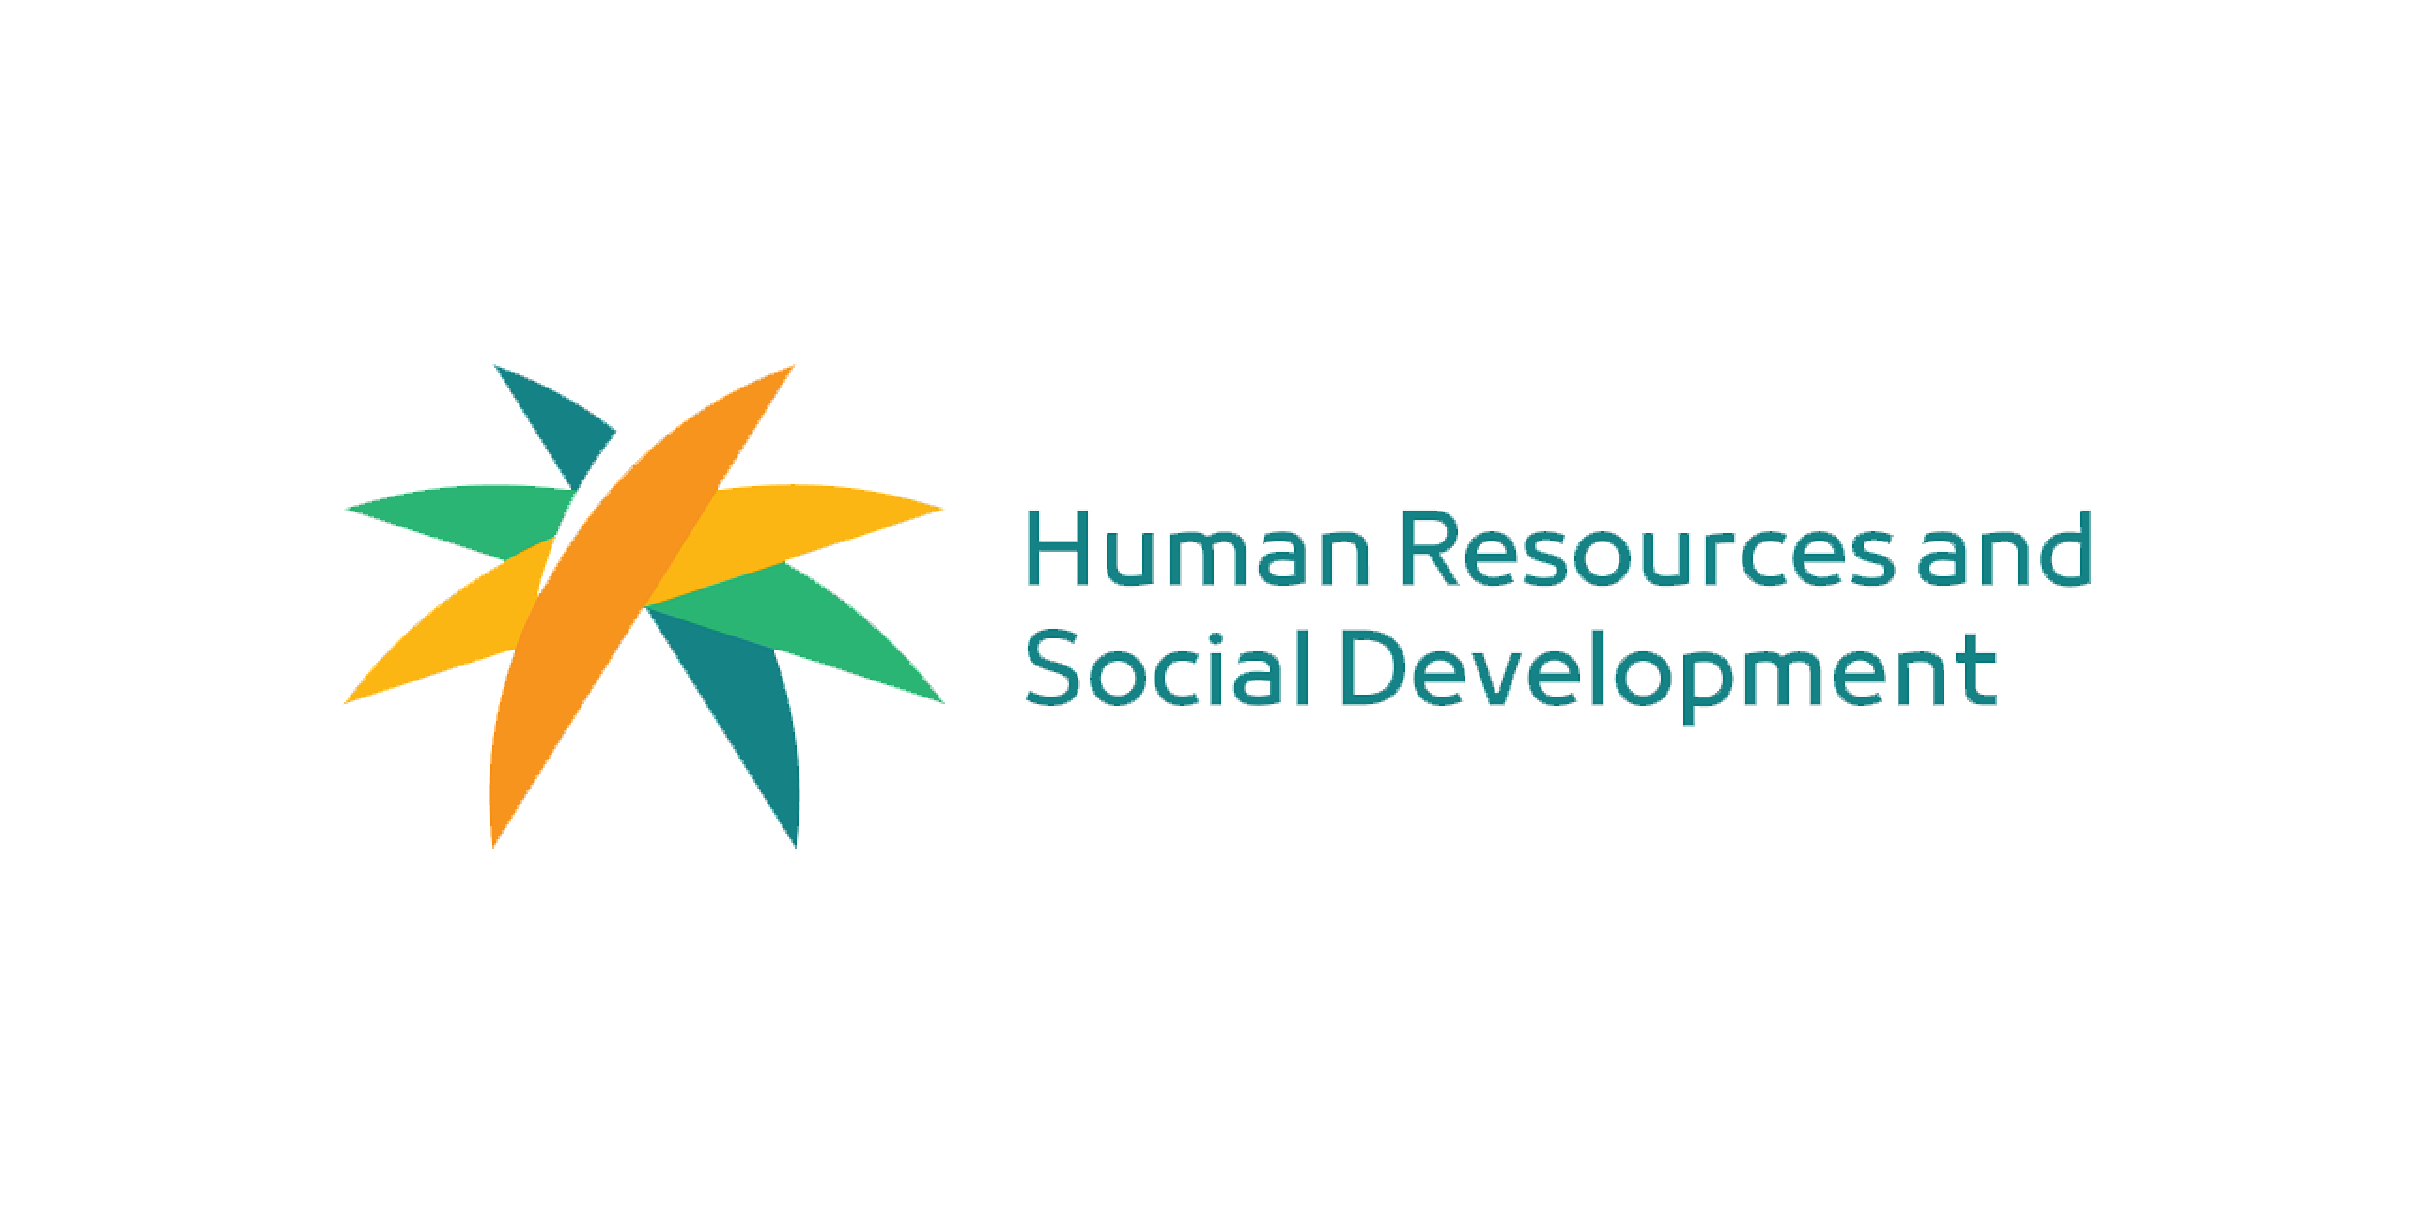 Human Resources and Social Development